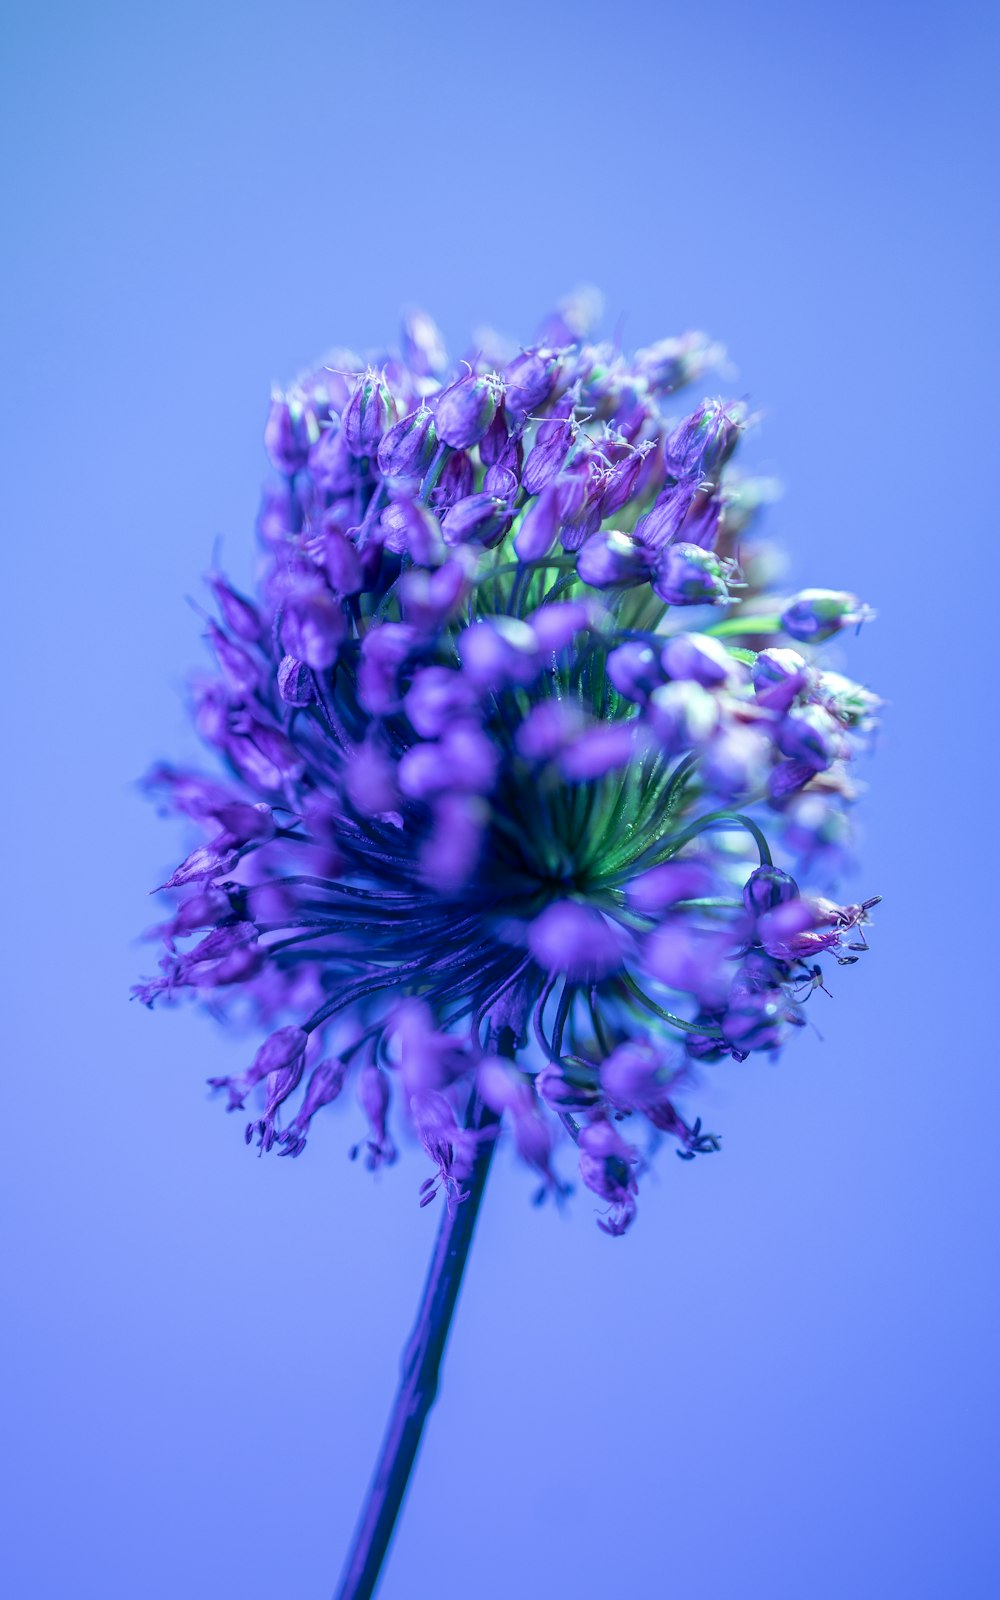 a close up of a purple flower on a blue background